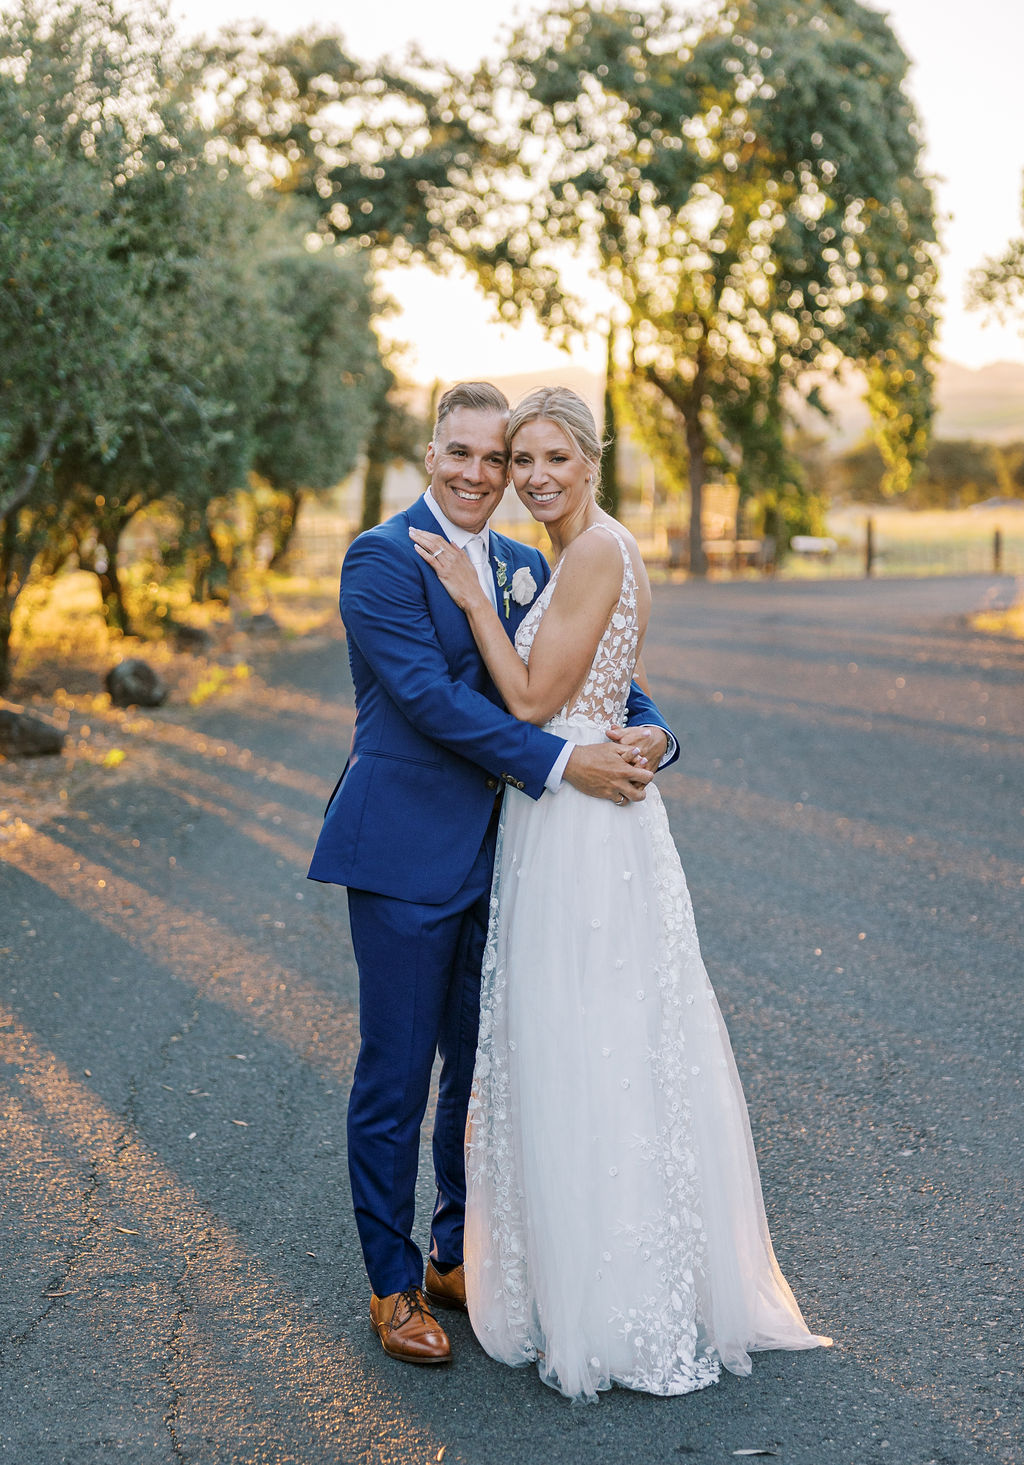 A modern Napa wedding with odes to the couple’s international roots